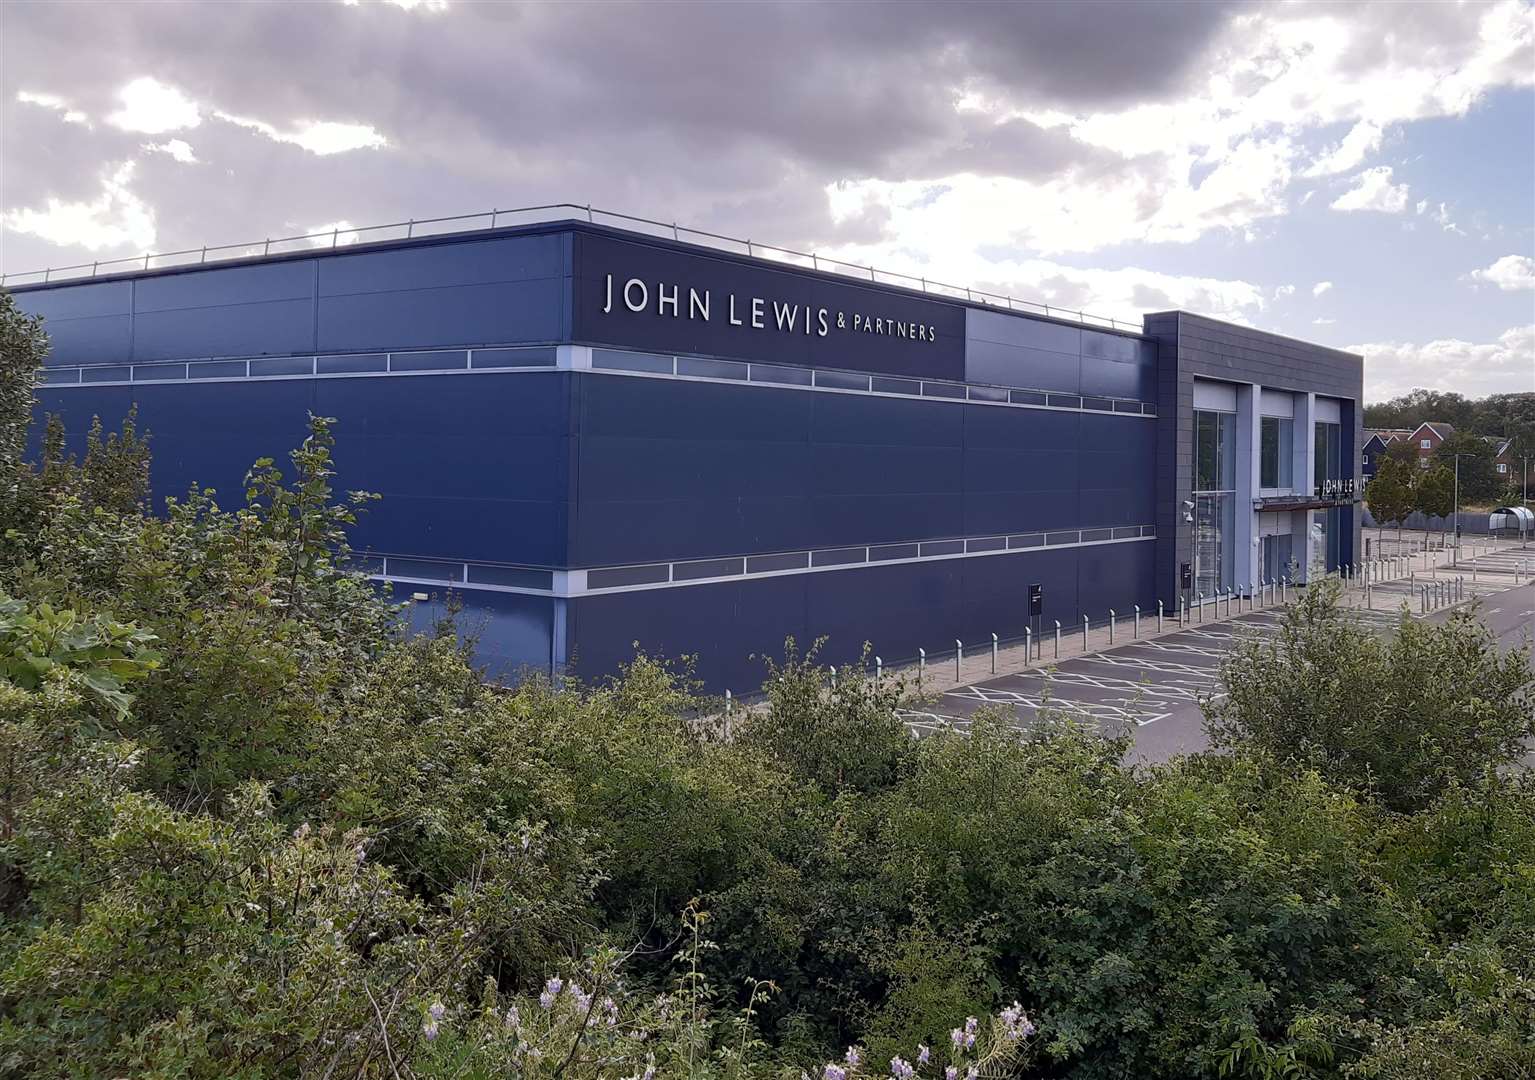 Ashford's now-abandoned John Lewis store was set to be included on the monorail line